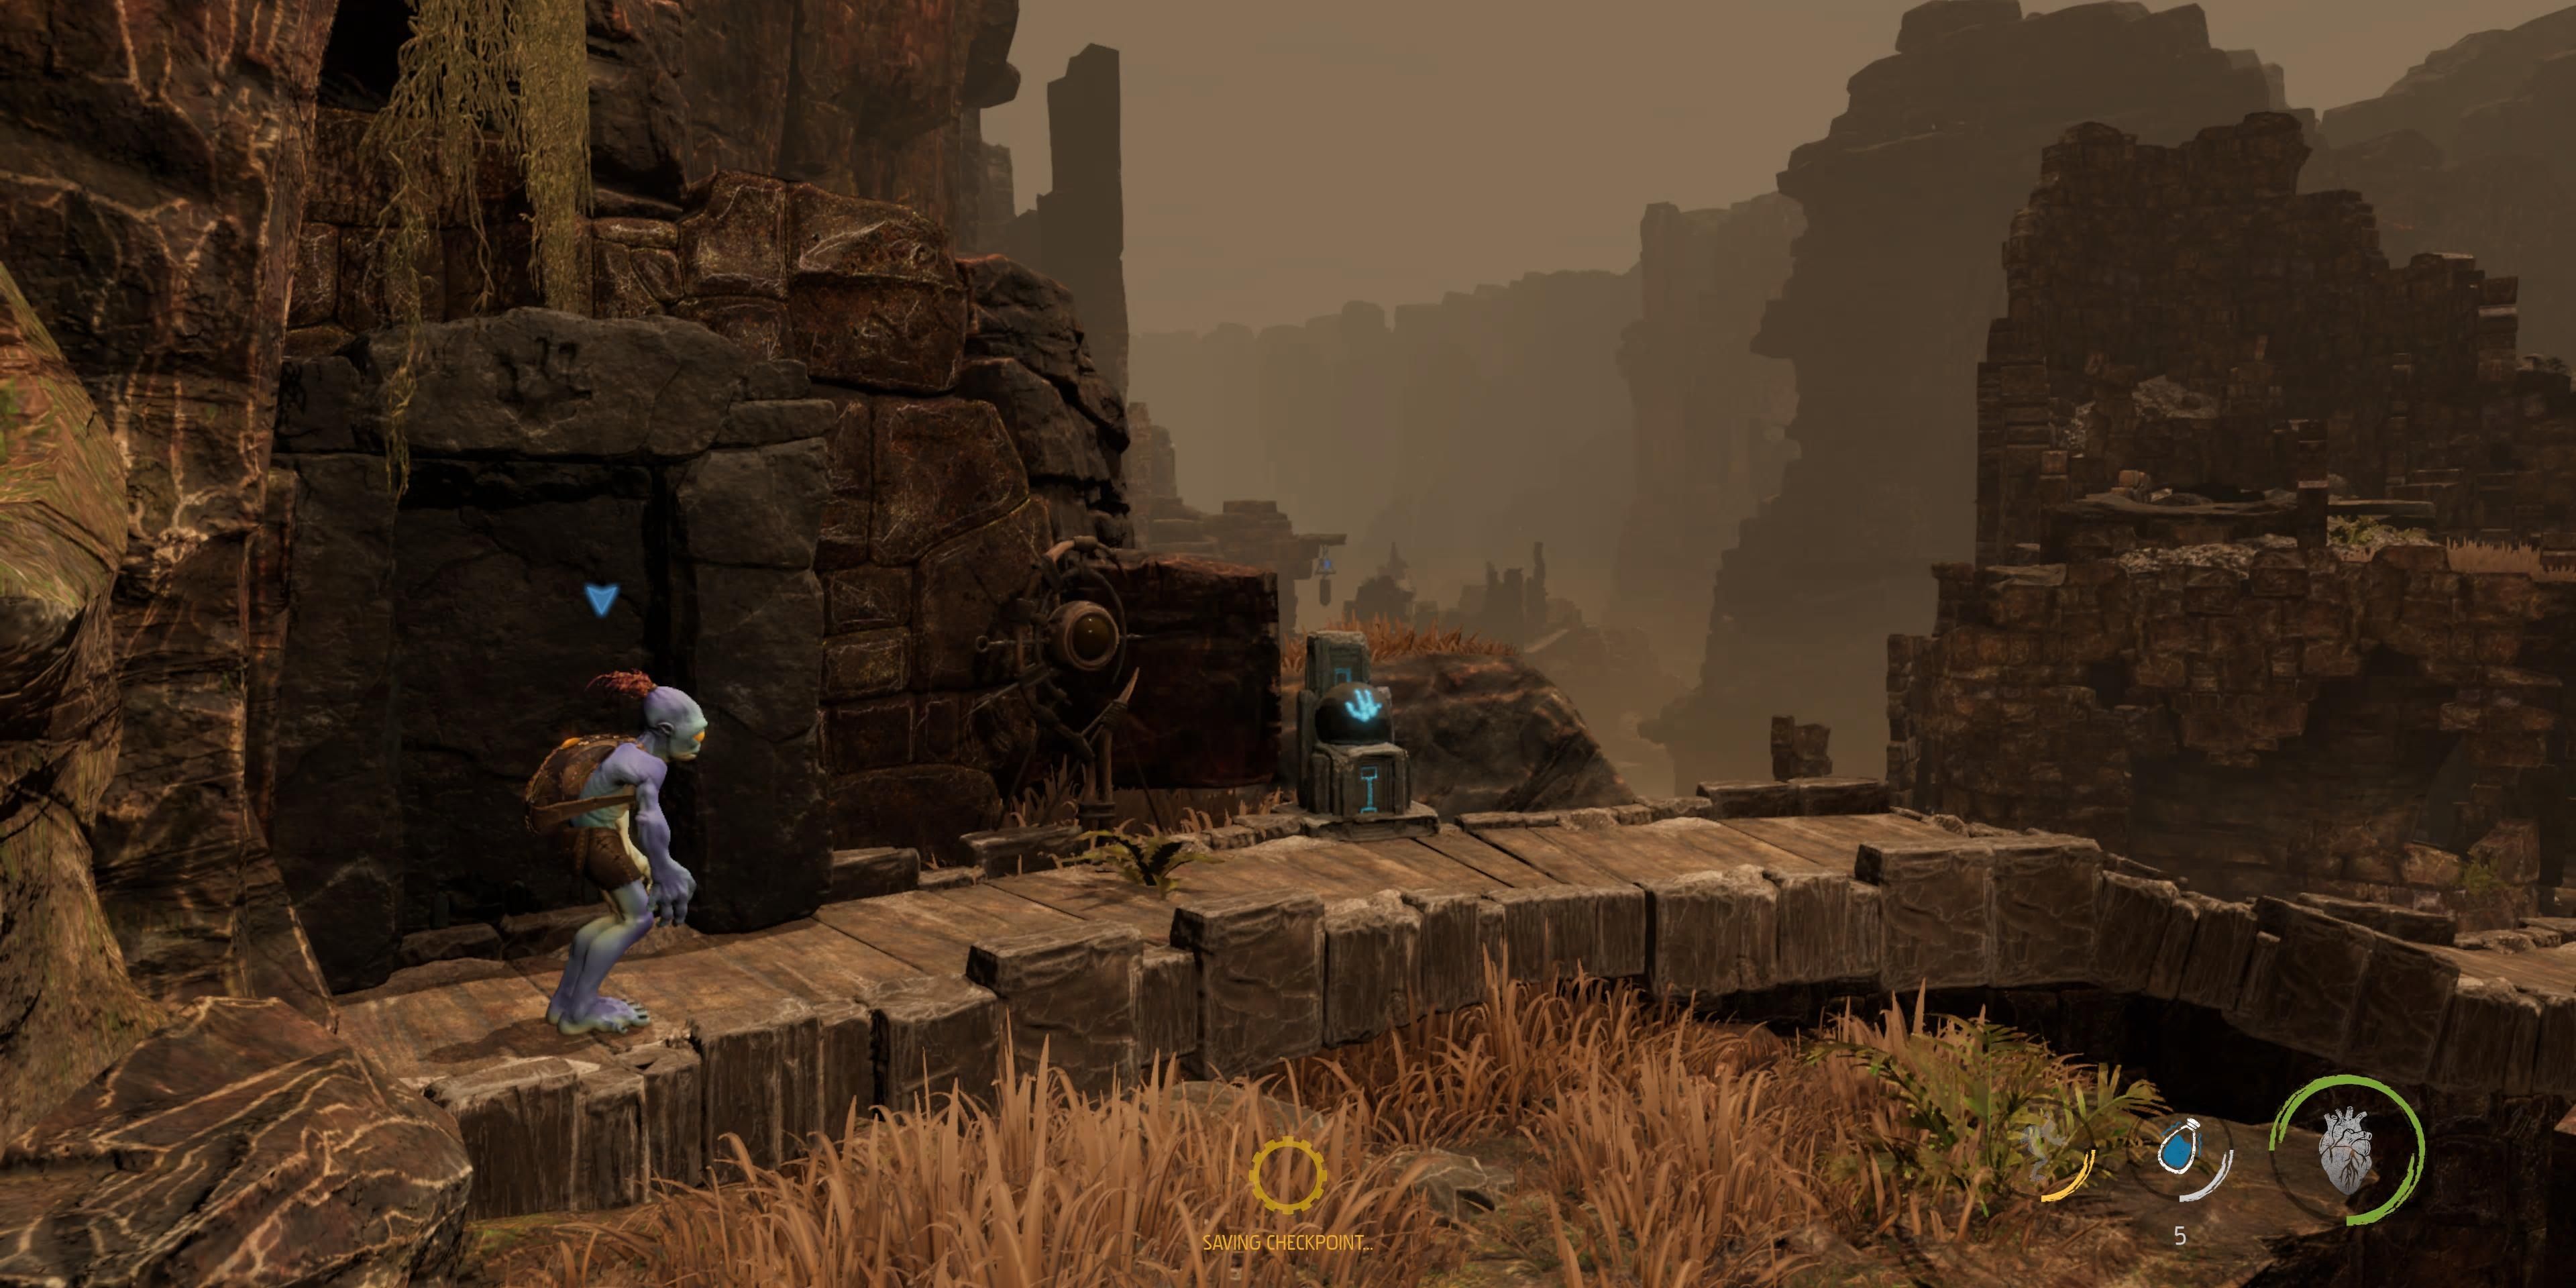 The Ruins stage in Oddworld Soulstorm